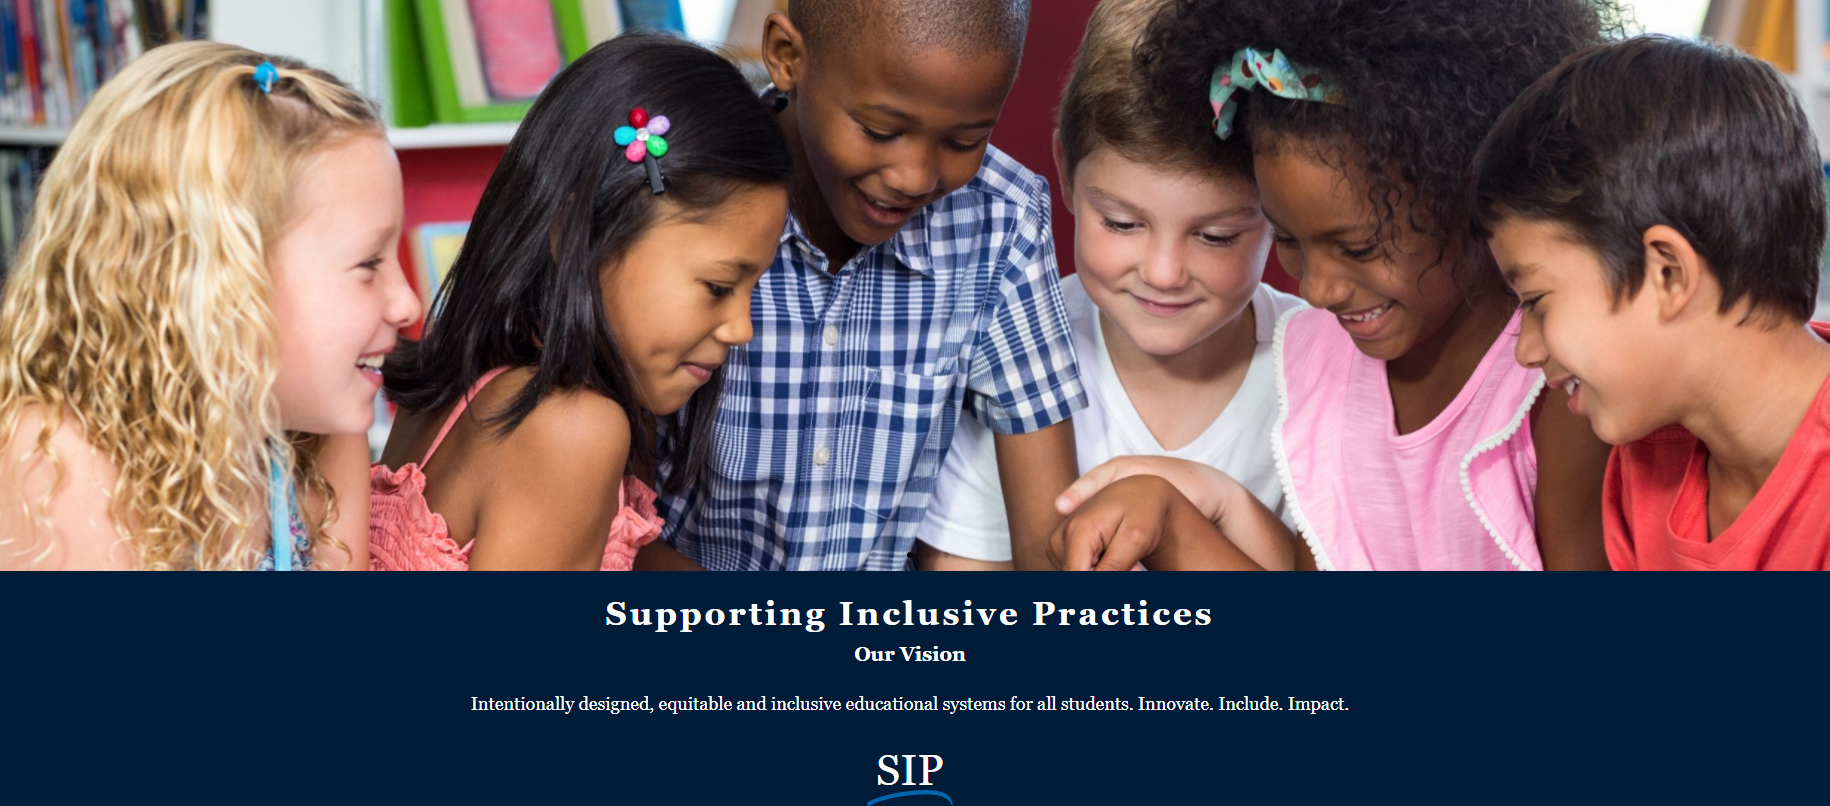 Supporting Inclusive Practices is funded by CA Department of Education. Their purpose is to increase the inclusion of students with disabilities in public education classrooms, for the benefit of all students.